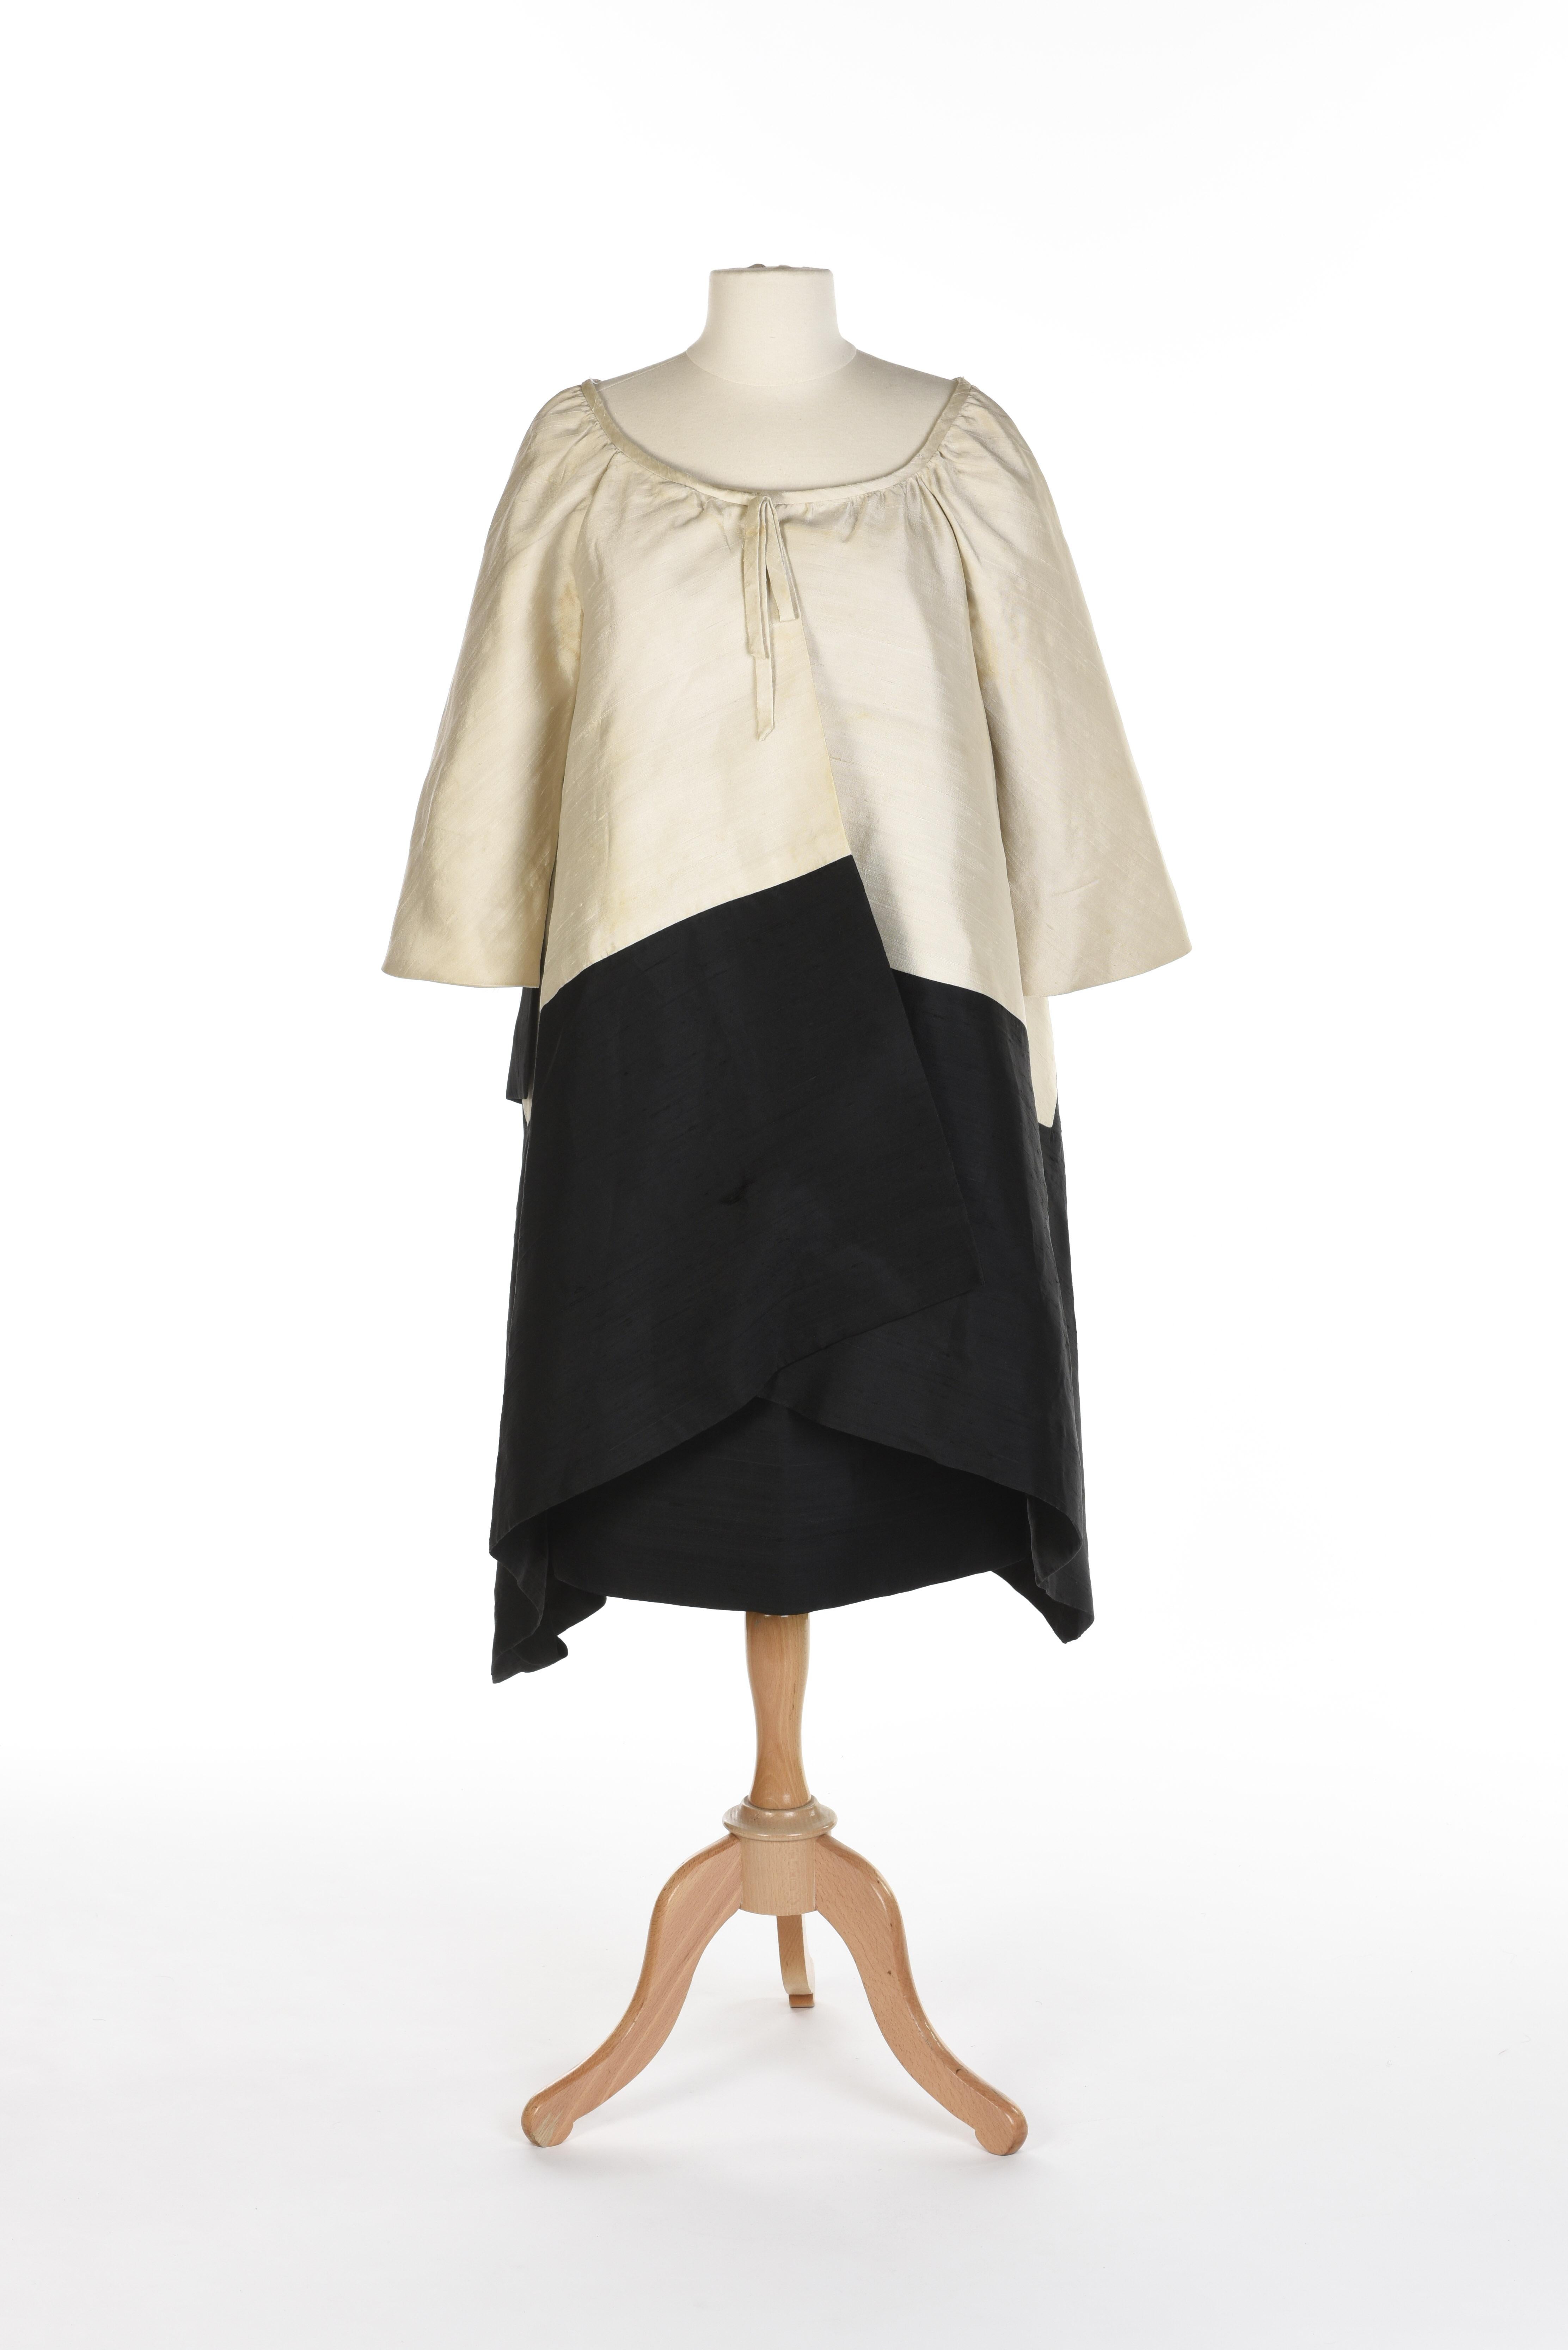 Women's An Hubert de Givenchy French Couture Cream and Black silk Evening Set Circa 1965 For Sale